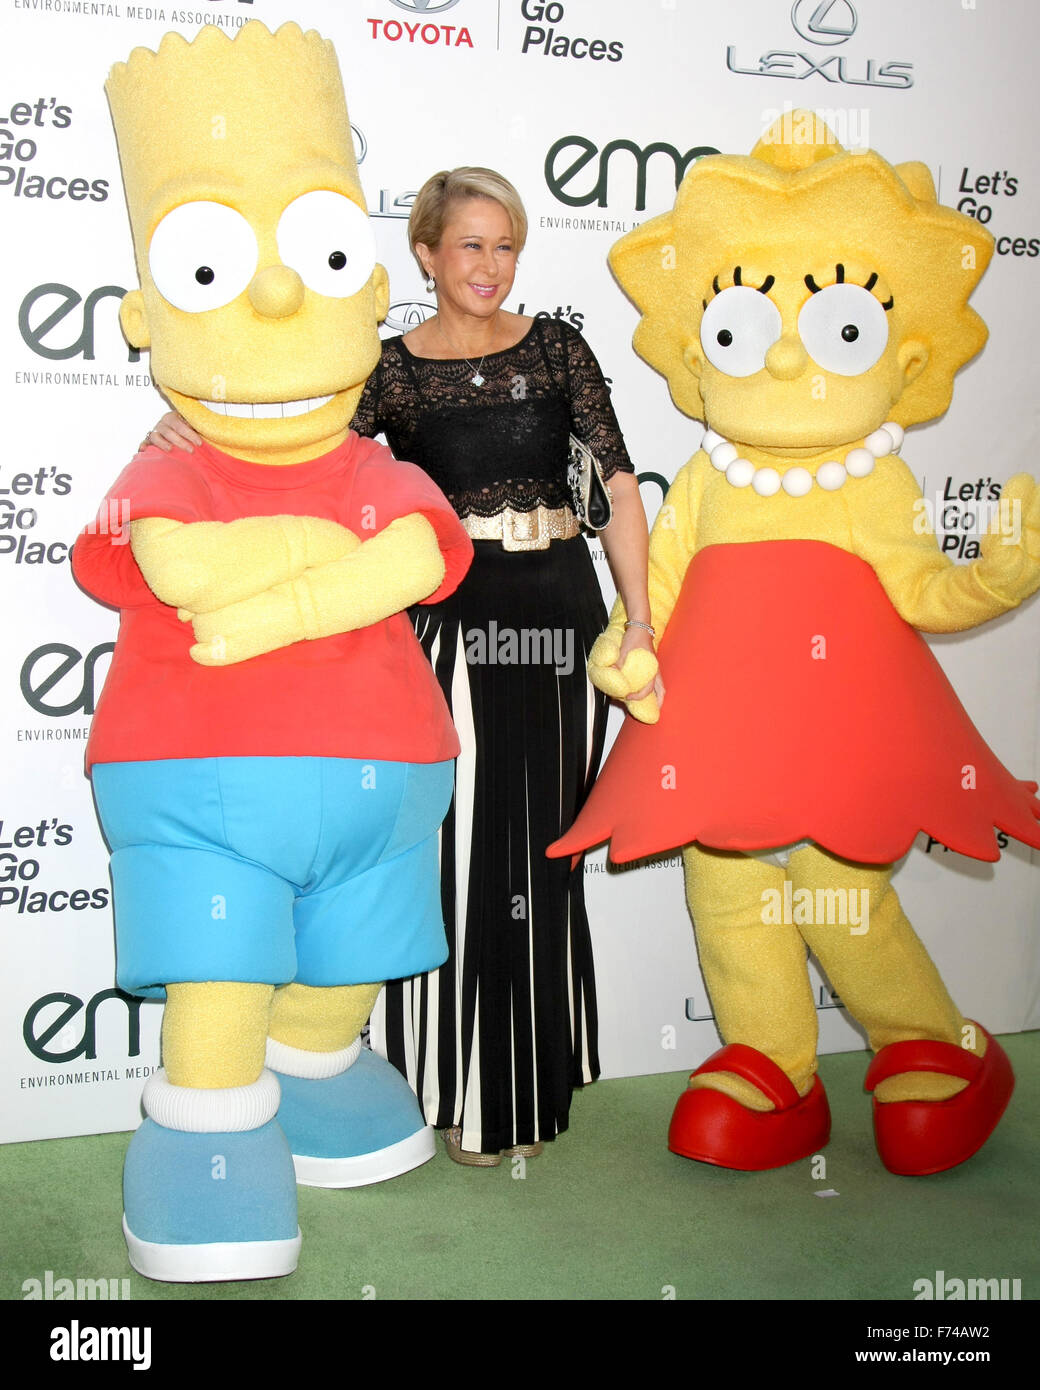 25th annual Environmental Media Awards at Warner Brother Studios Lot - Arrivals  Featuring: Bart Simpson Charachter, Yeardley Smith, Lisa Simpson charachter Where: Burbank, California, United States When: 24 Oct 2015 Stock Photo